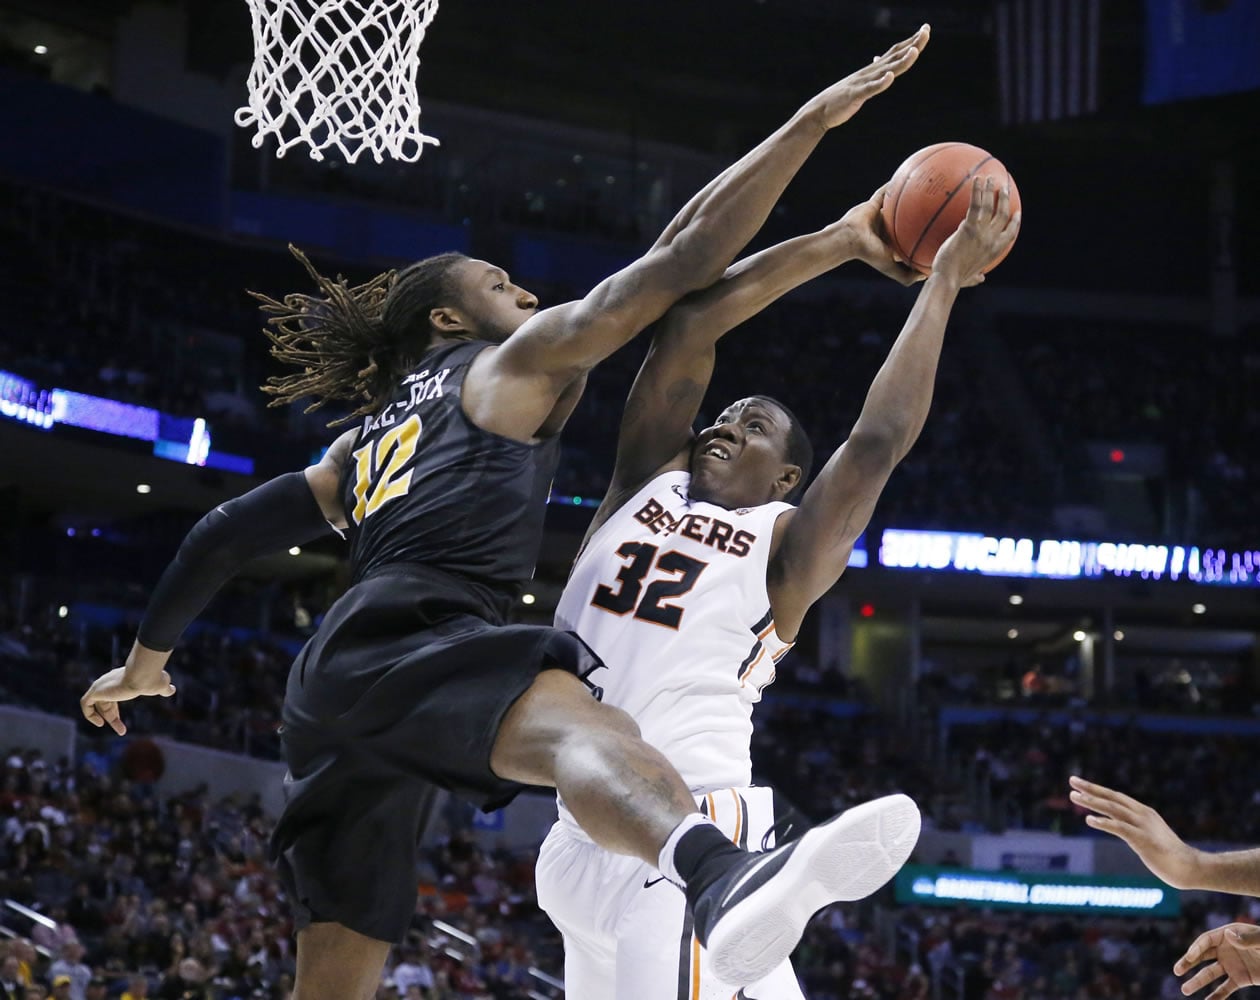 Oregon State forward Jarmal Reid (32) shoots as Virginia Commonwealth forward Mo Alie-Cox (12) defends in the second half of a first-round men's college basketball game in the NCAA Tournament, Friday, March 18, 2016, in Oklahoma City. VCU won 75-67.